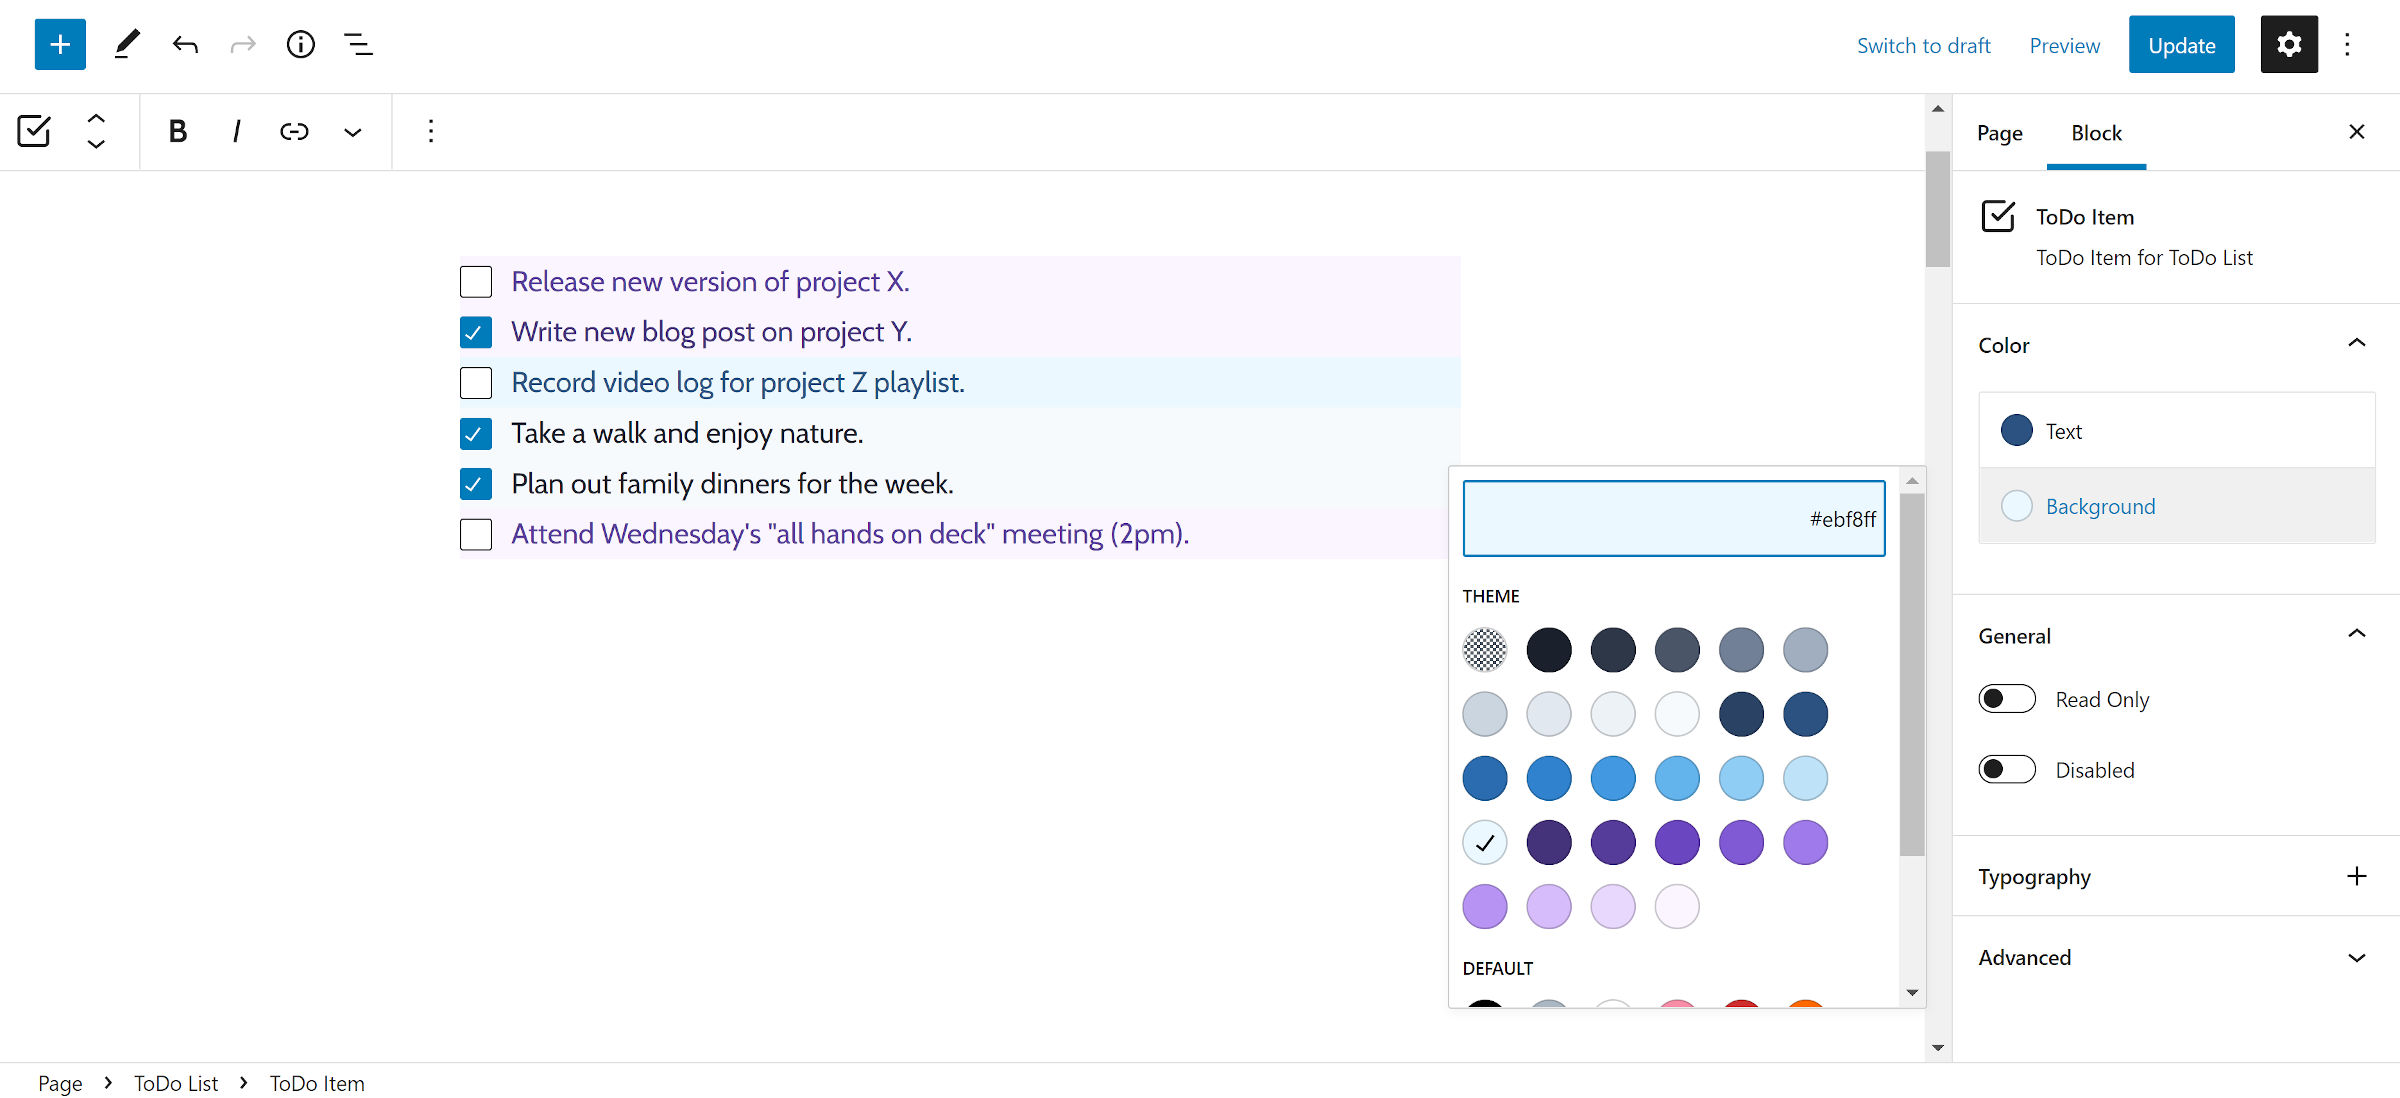 Todo list in the WordPress editor.  Each item has different colors to categorize each task.  In the block options sidebar, the background color popup is open for one of the todo items.